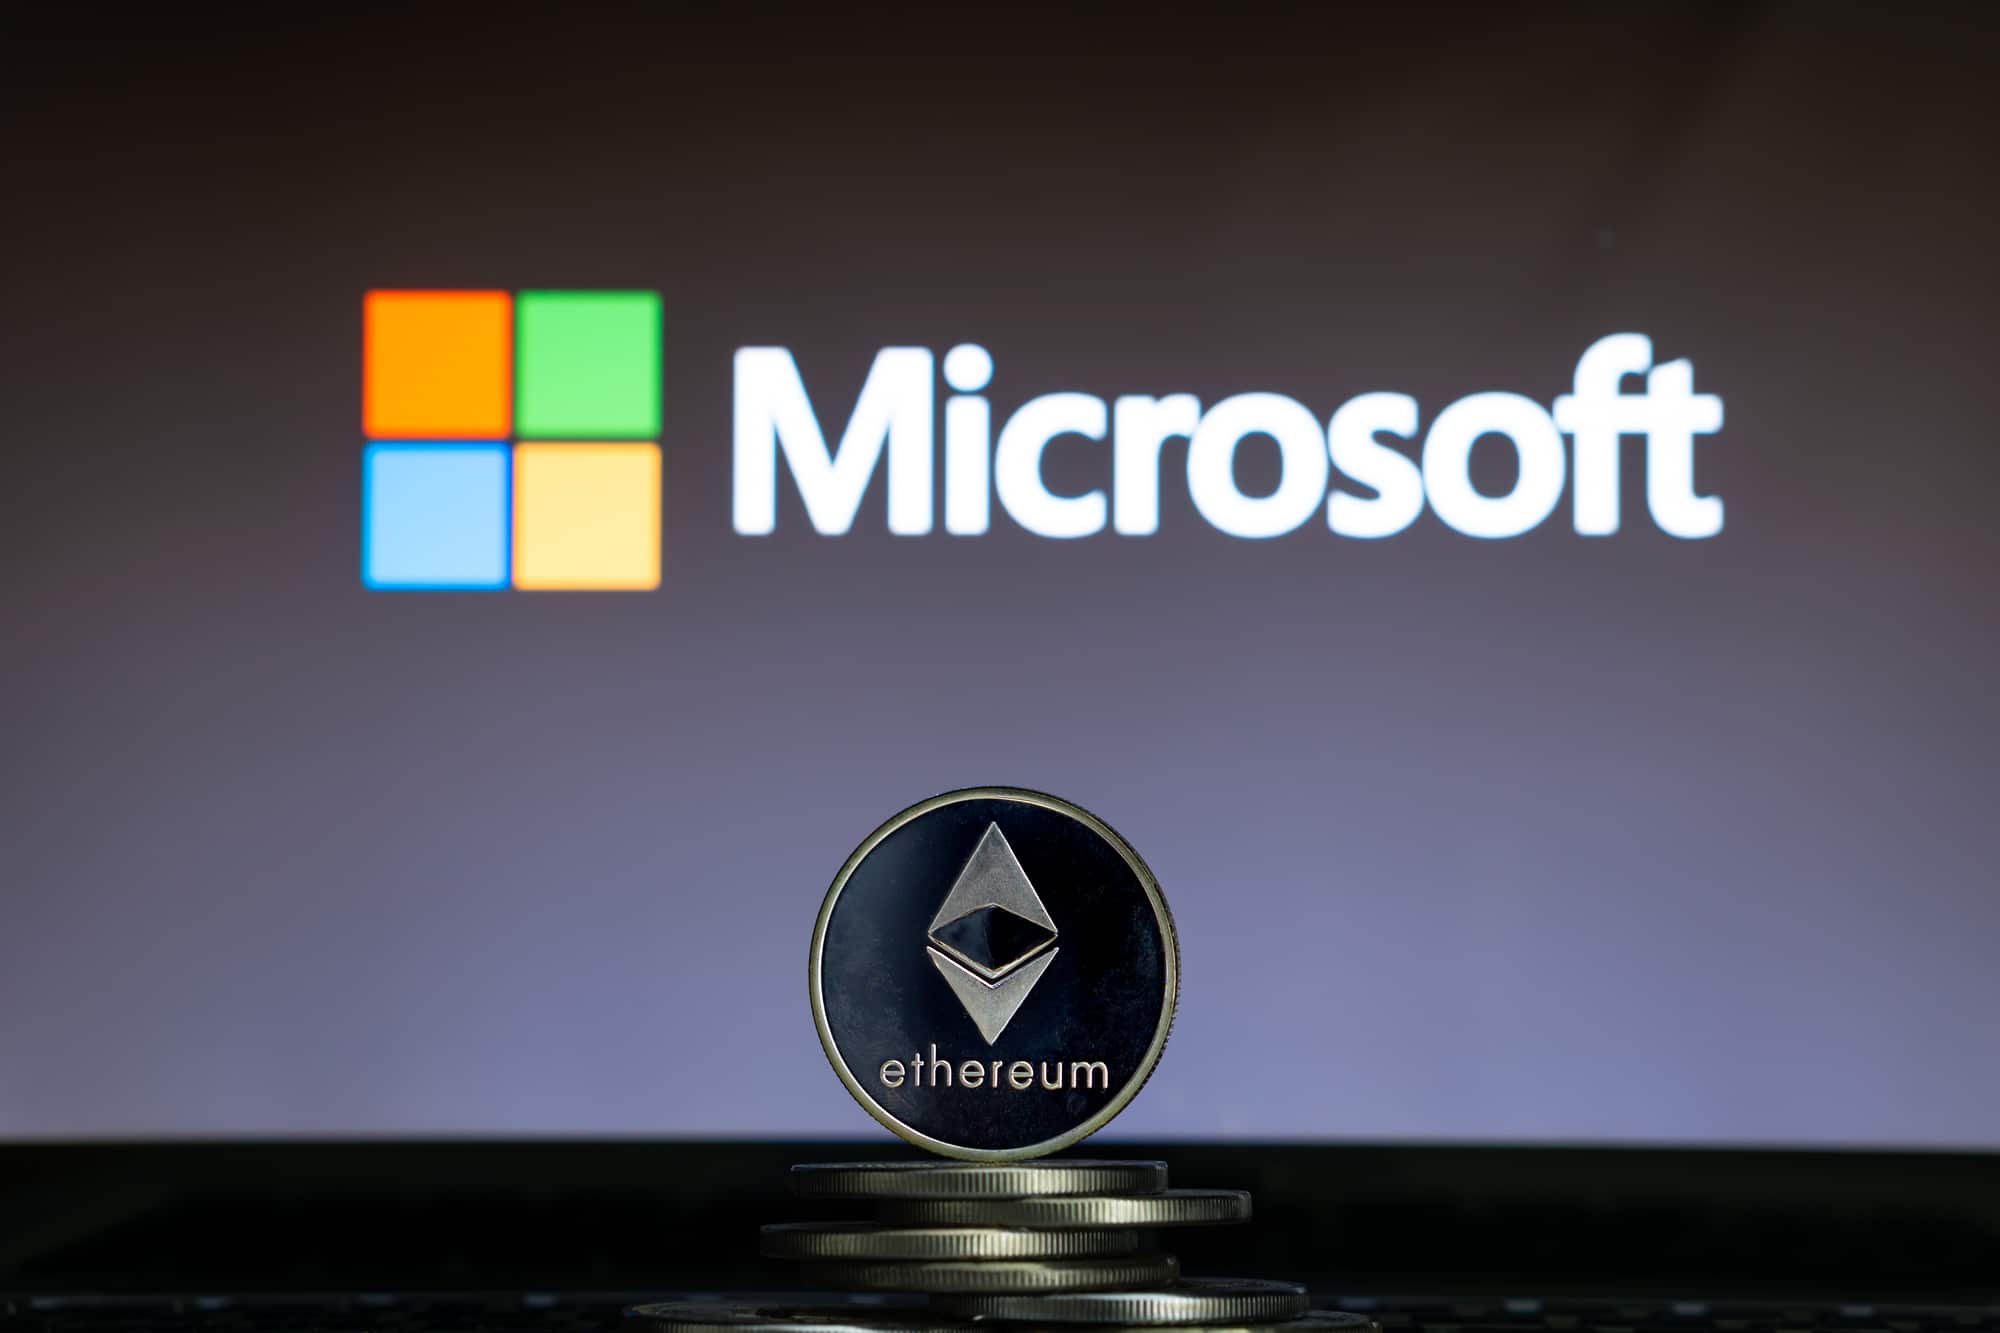 Microsoft will use Ethereum for an antipiracy system